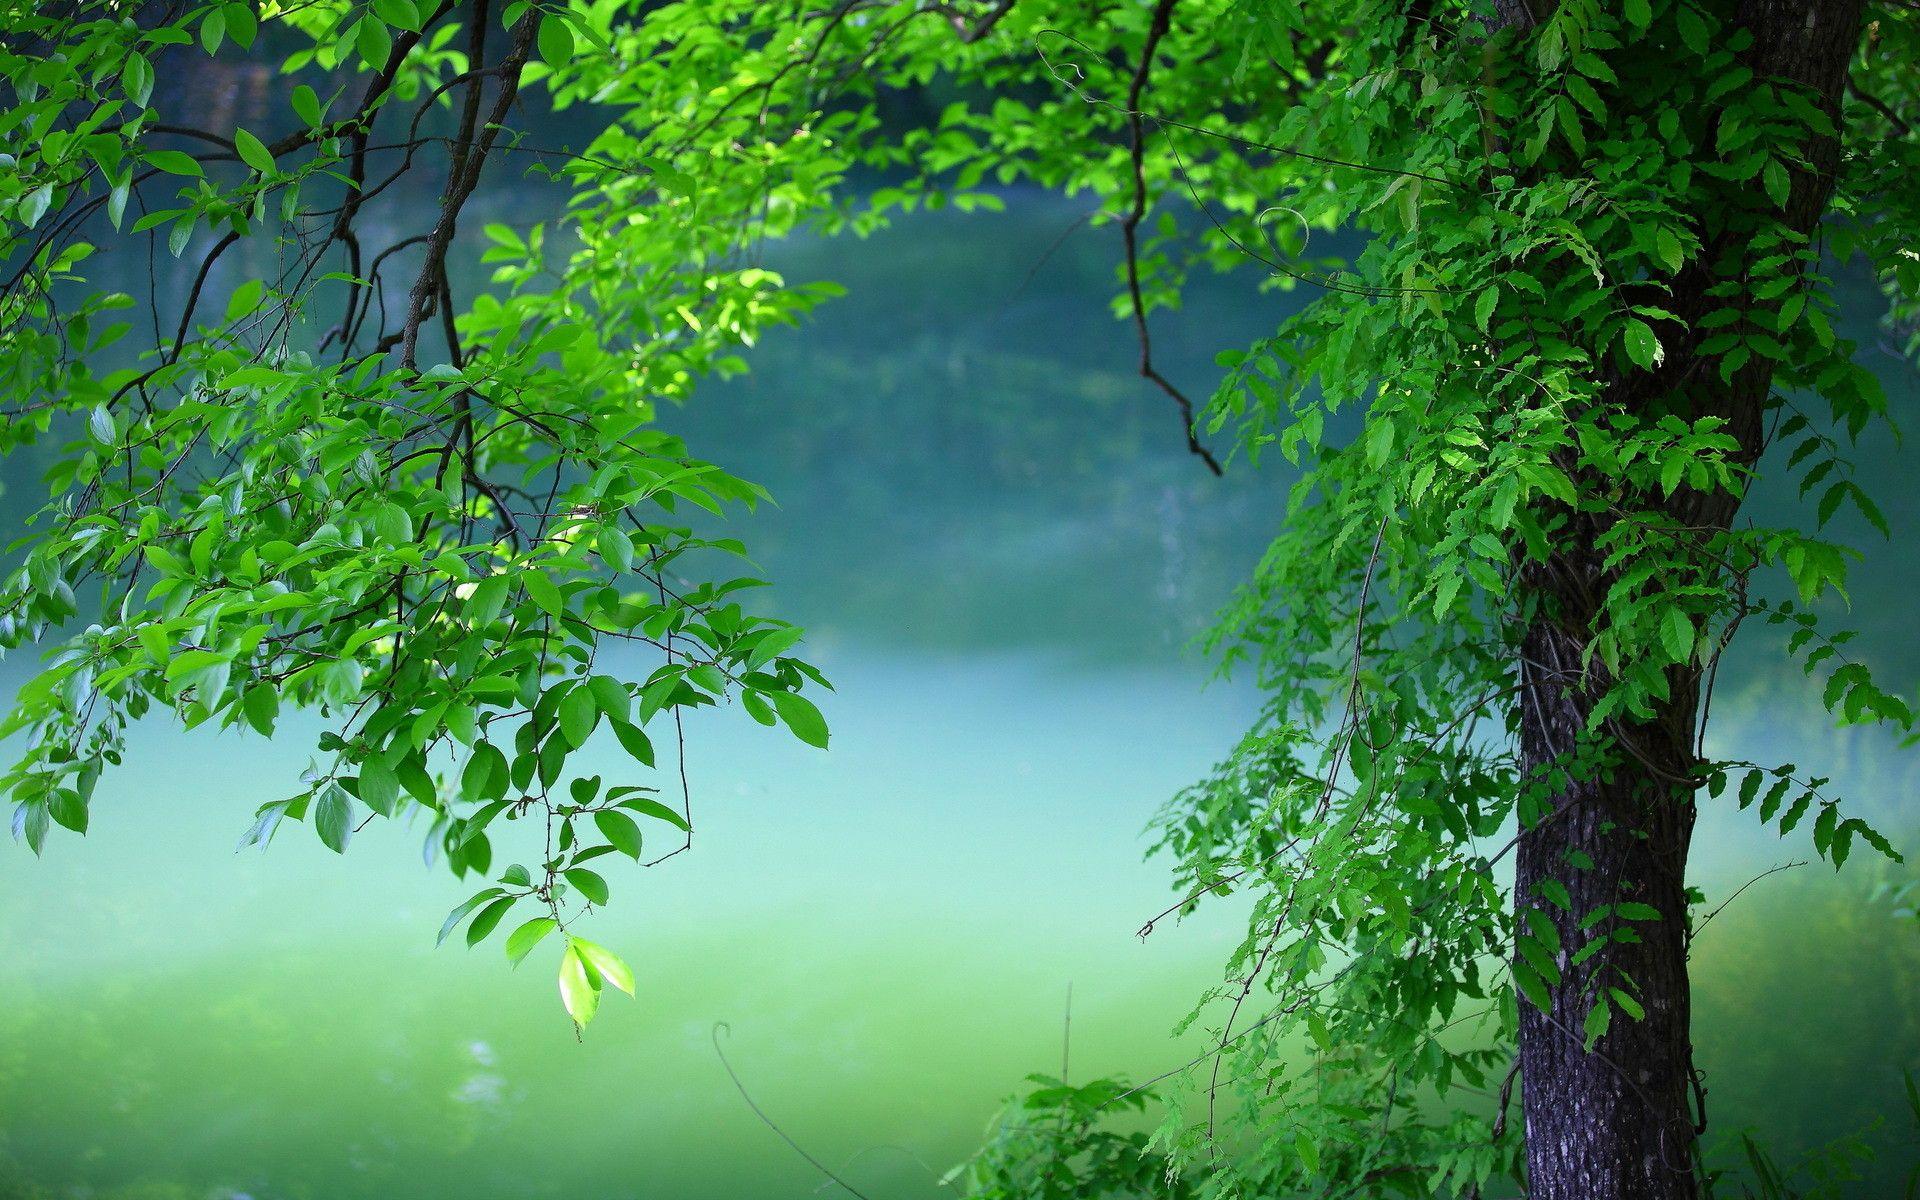 4k Nature Green Wallpapers - Top Free 4k Nature Green Backgrounds